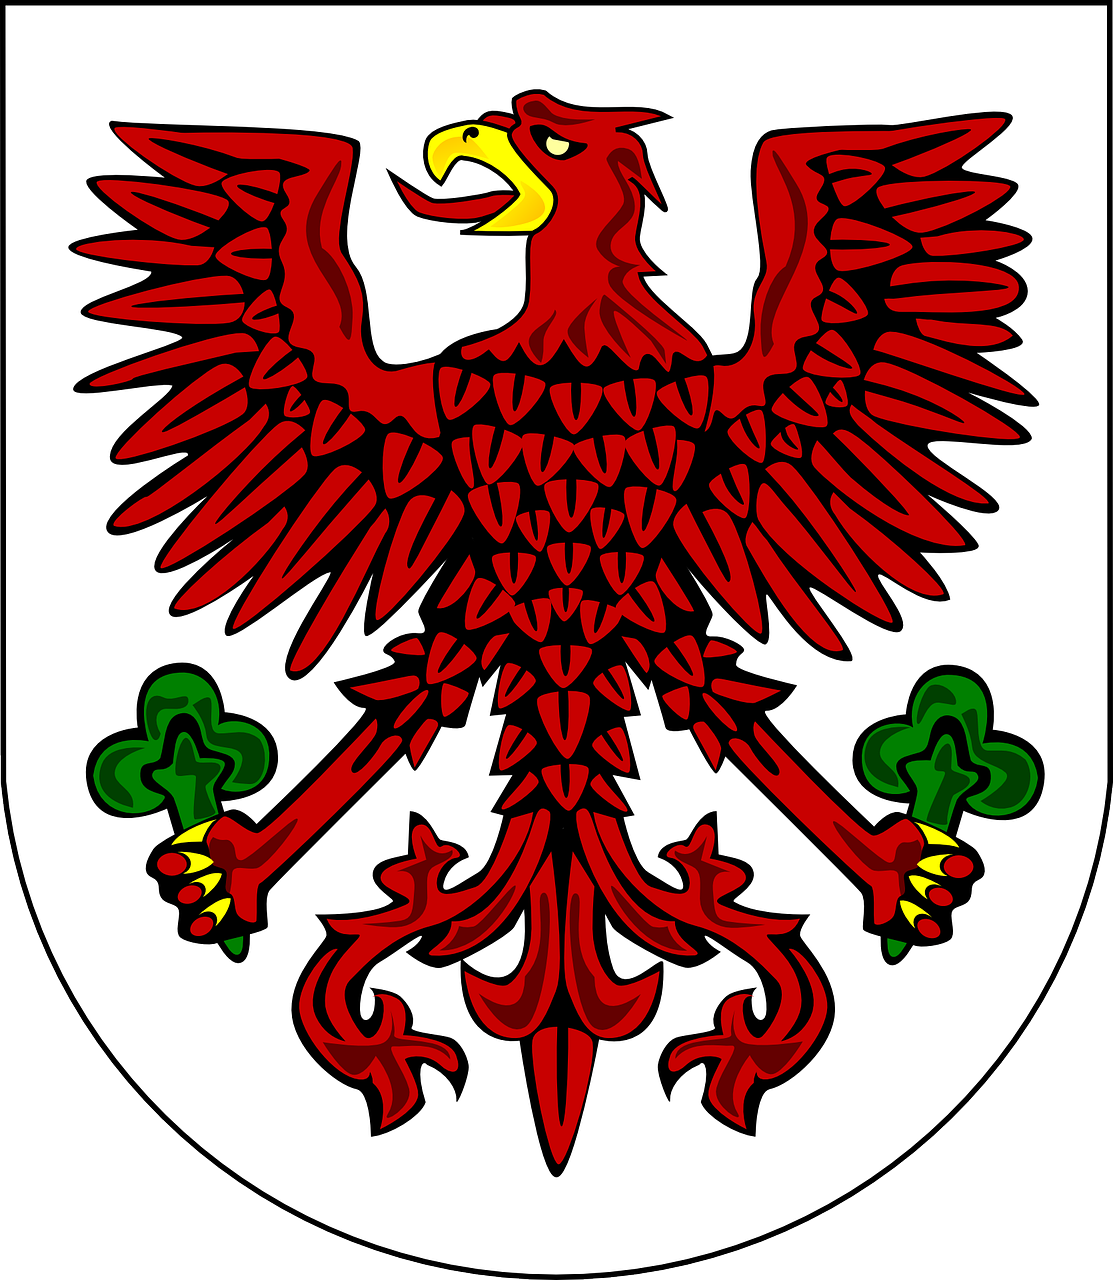 coat of arms crest eagle free photo